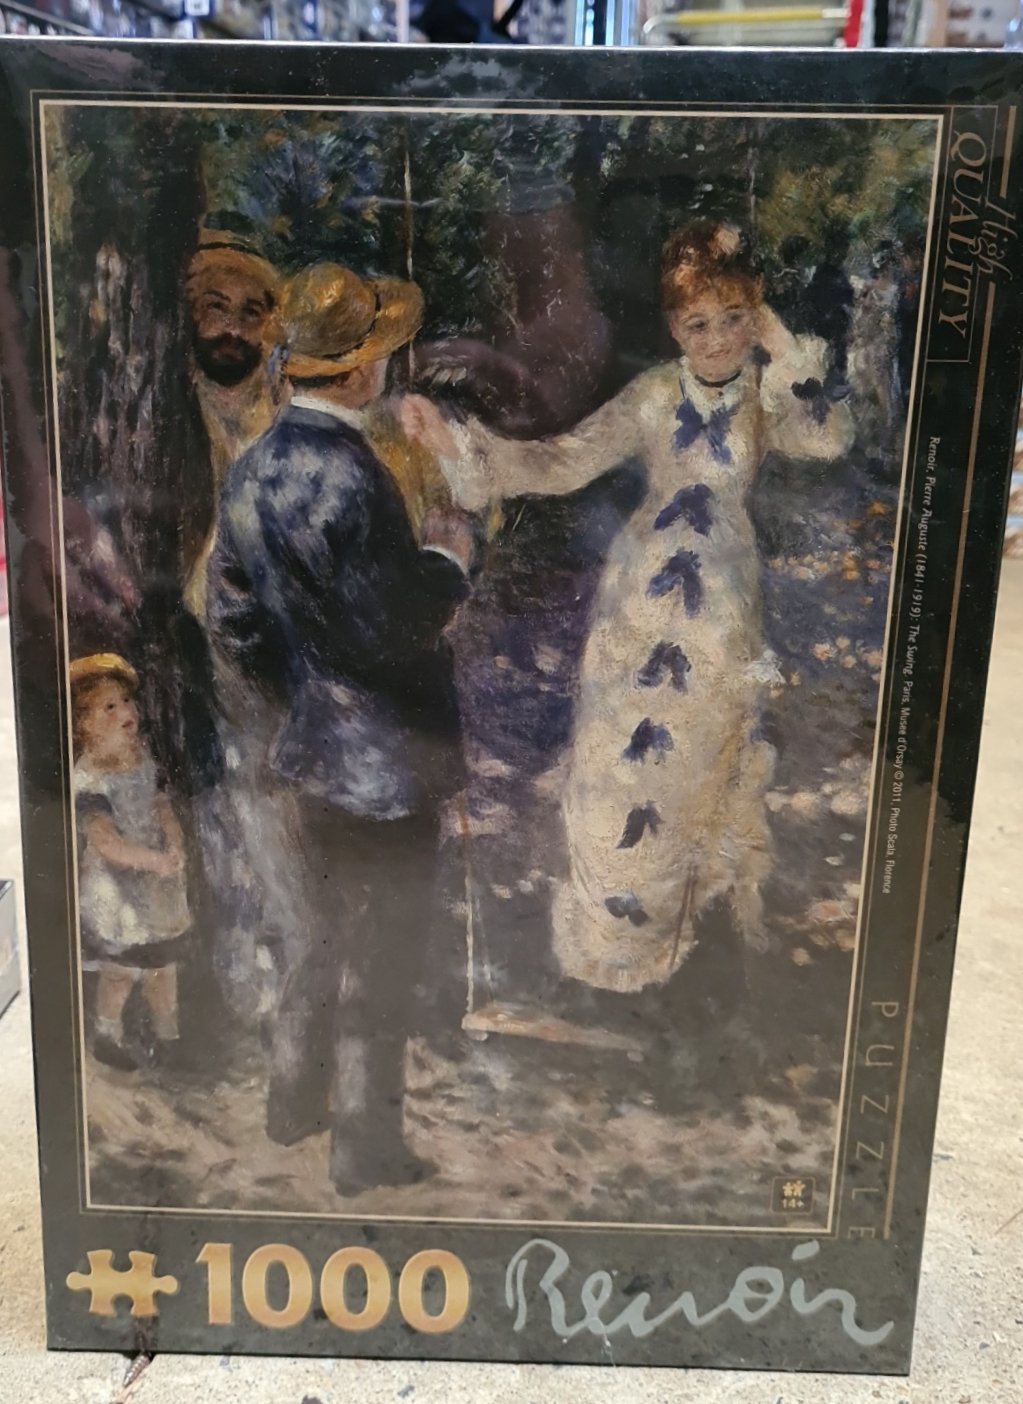 Dtoys - Renoir : The Swing - 1000 Piece Jigsaw Puzzle